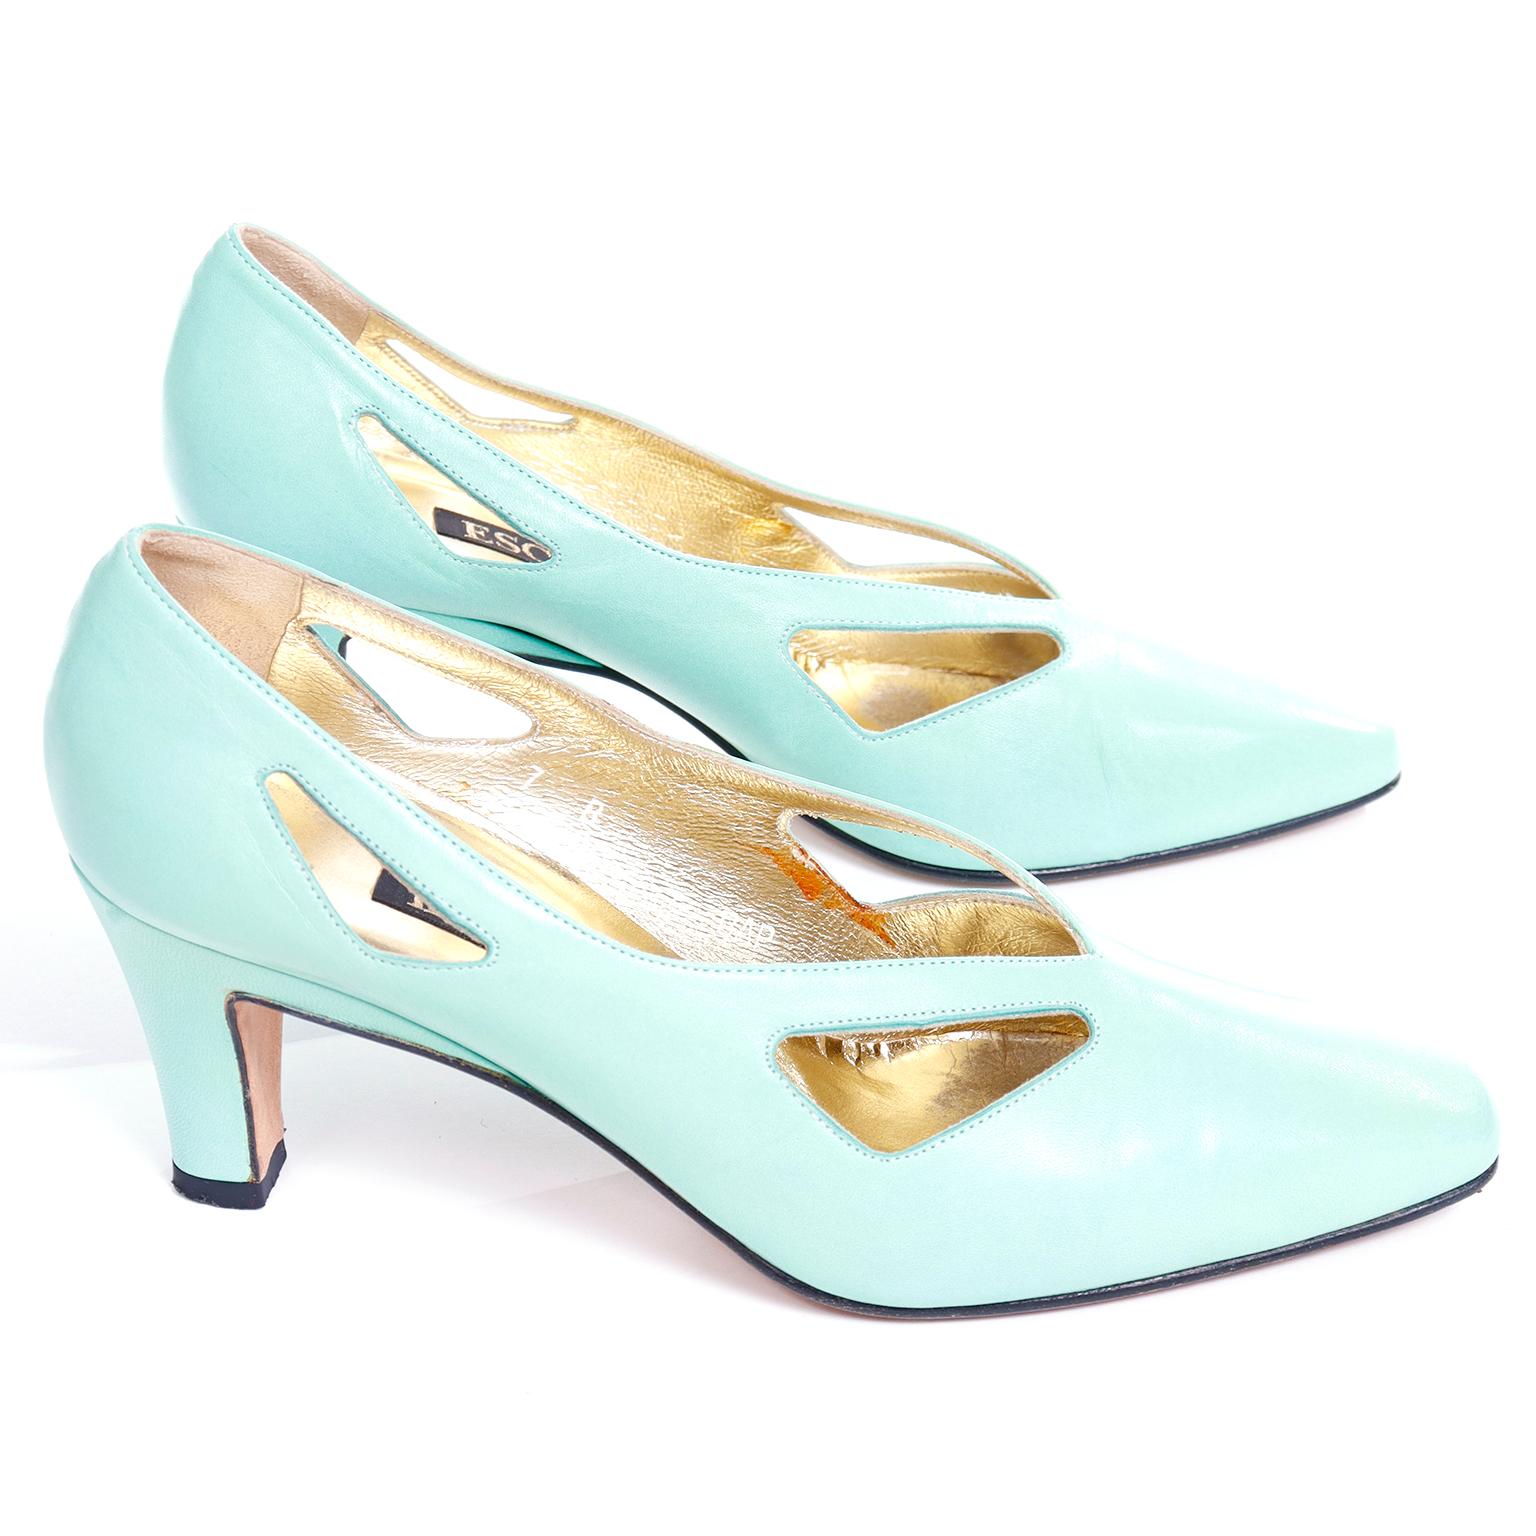 Gray Mint Green Escada Margaretha Ley 1980s Vintage Leather Shoes W Cutout Details 7B For Sale